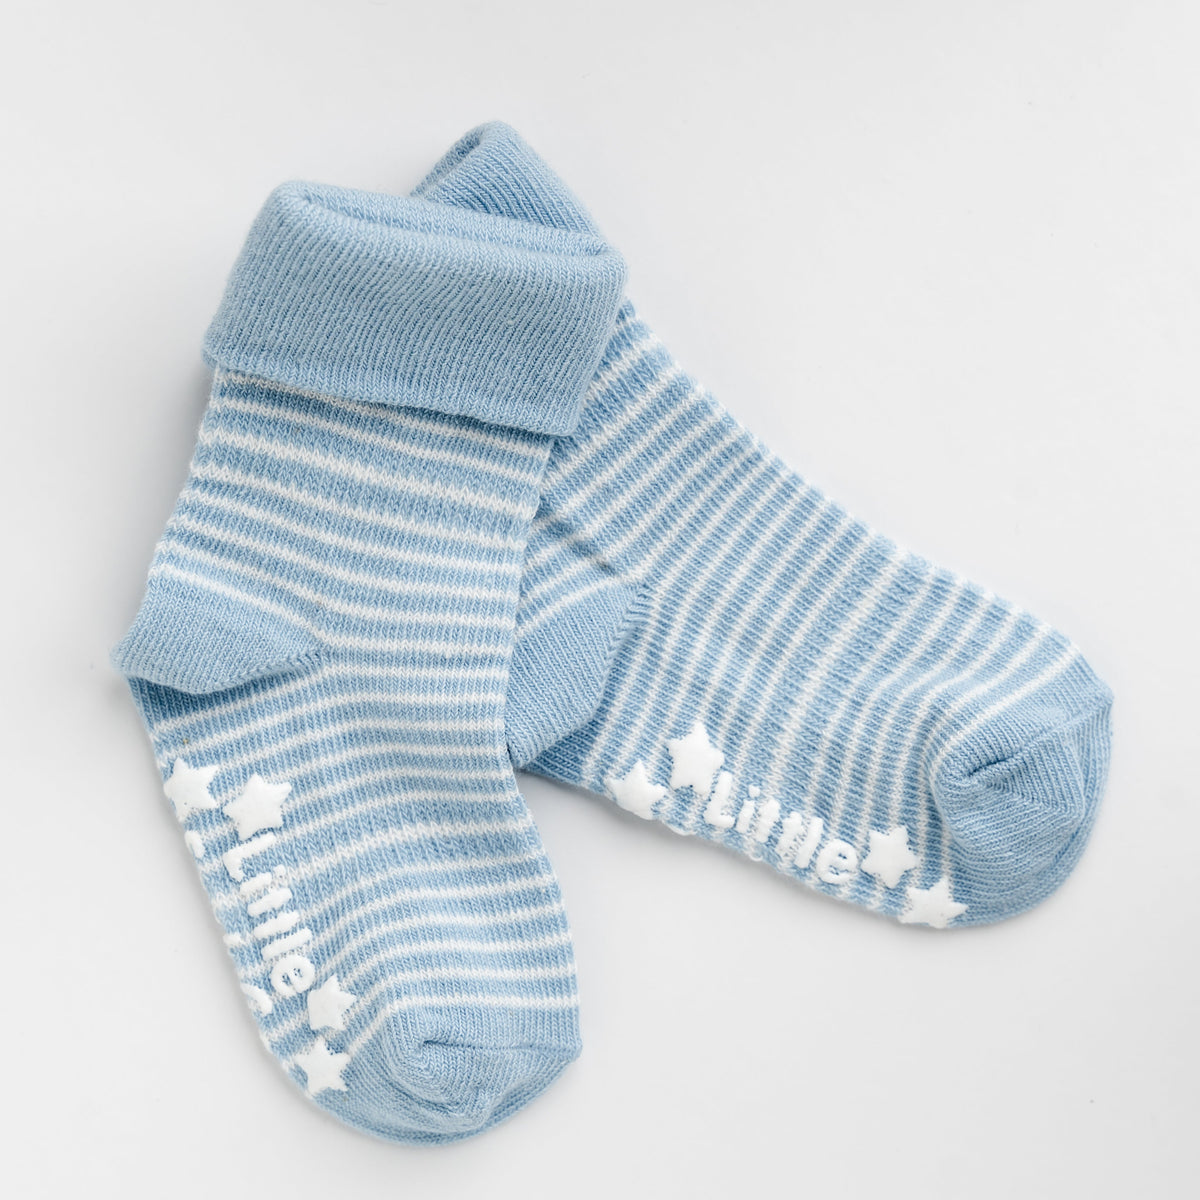 Non-Slip Stay On Baby and Toddler Socks - 3 Pack in Organic Sky Blue Stripe & Grey